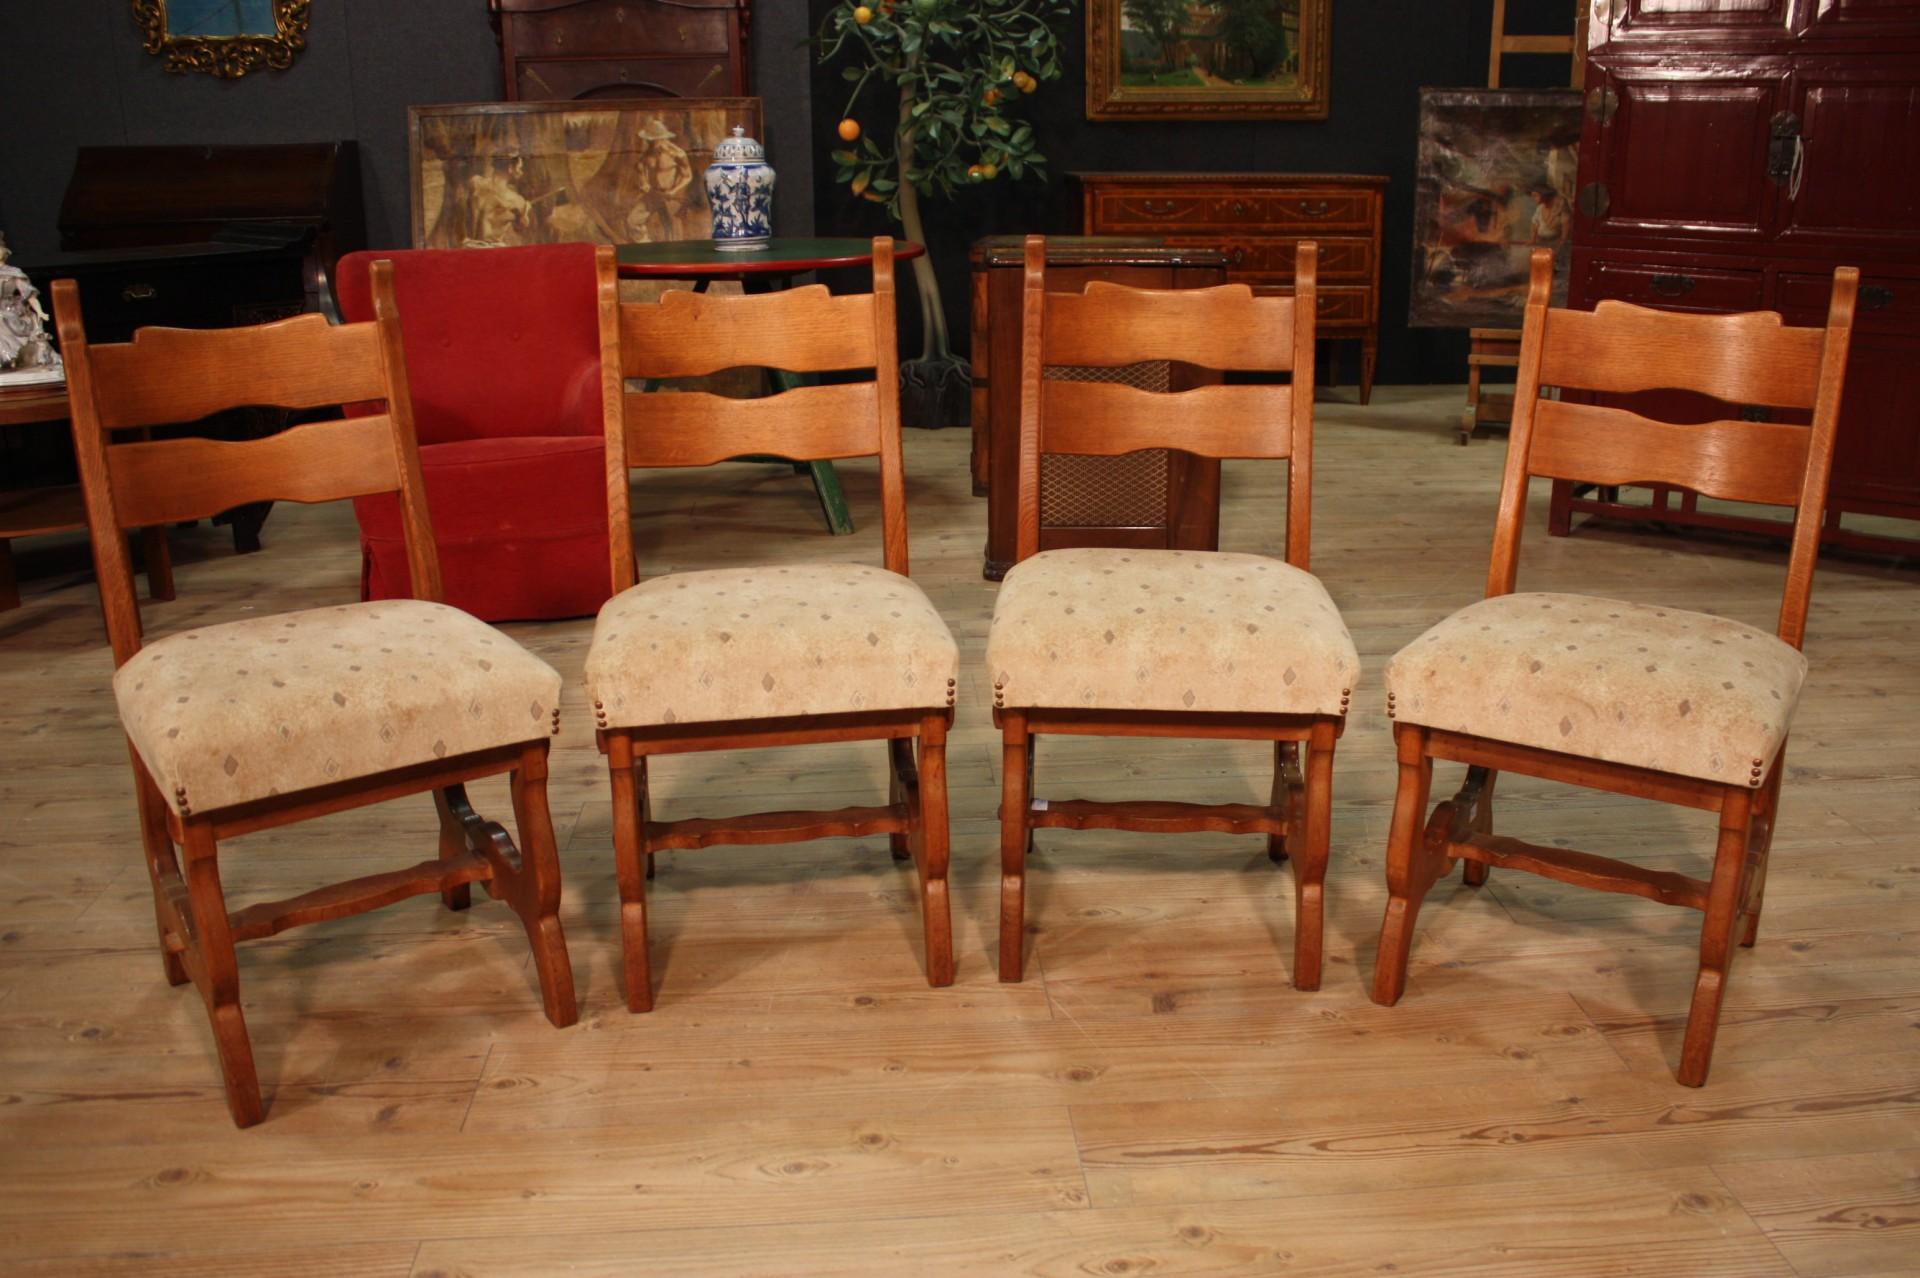 Group of 4 Rustic Northern European Chairs, 20th Century For Sale 7